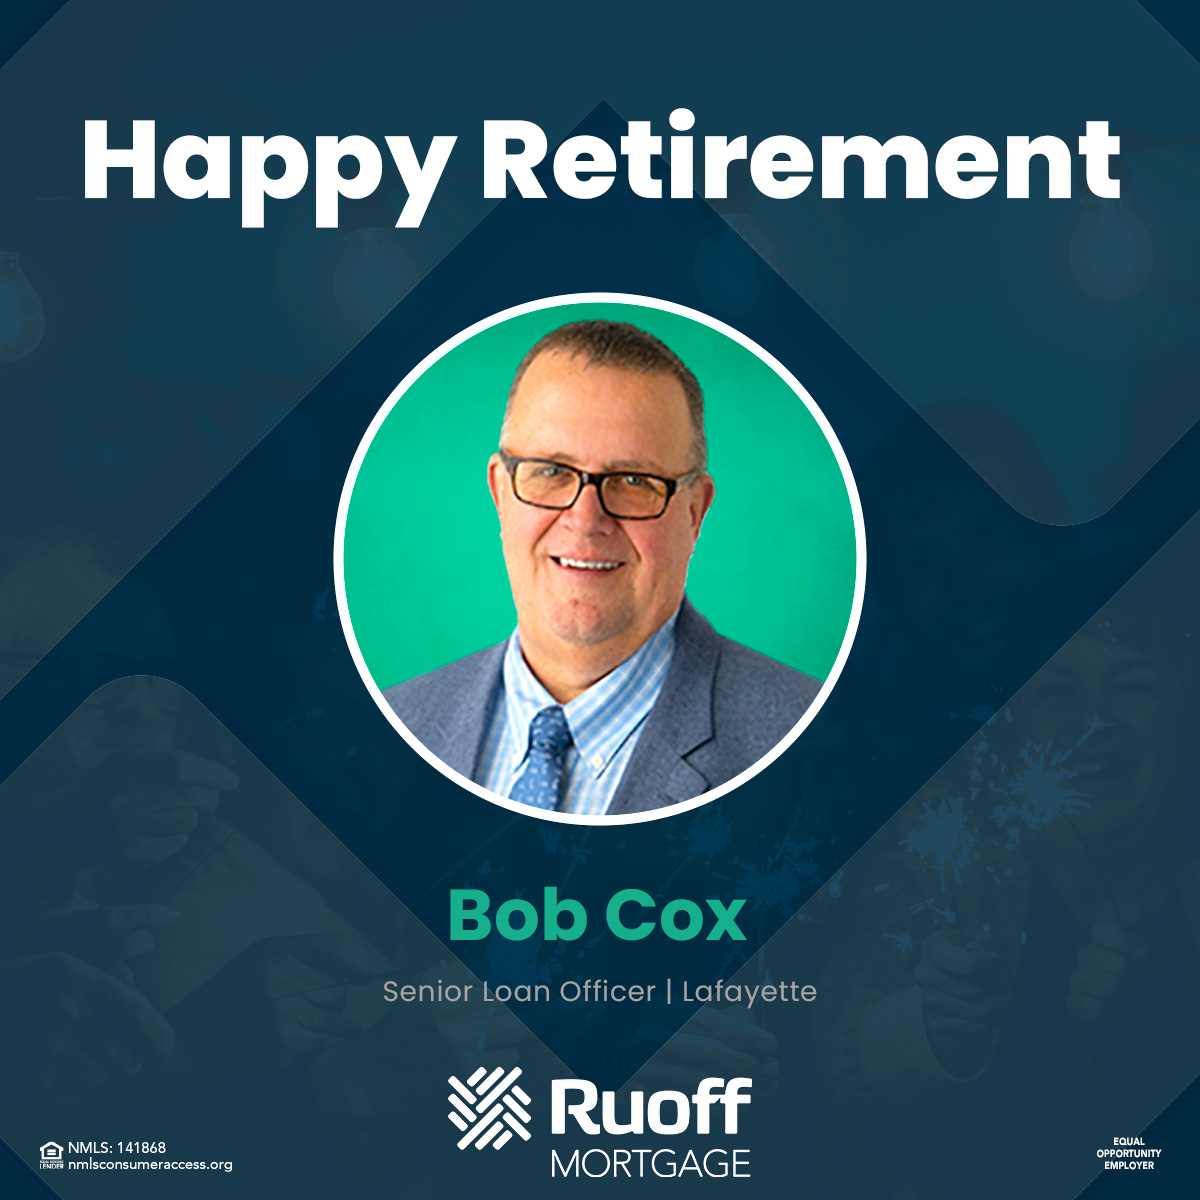 Congratulations on an outstanding career, Bob! Wishing you the best for your retirement!